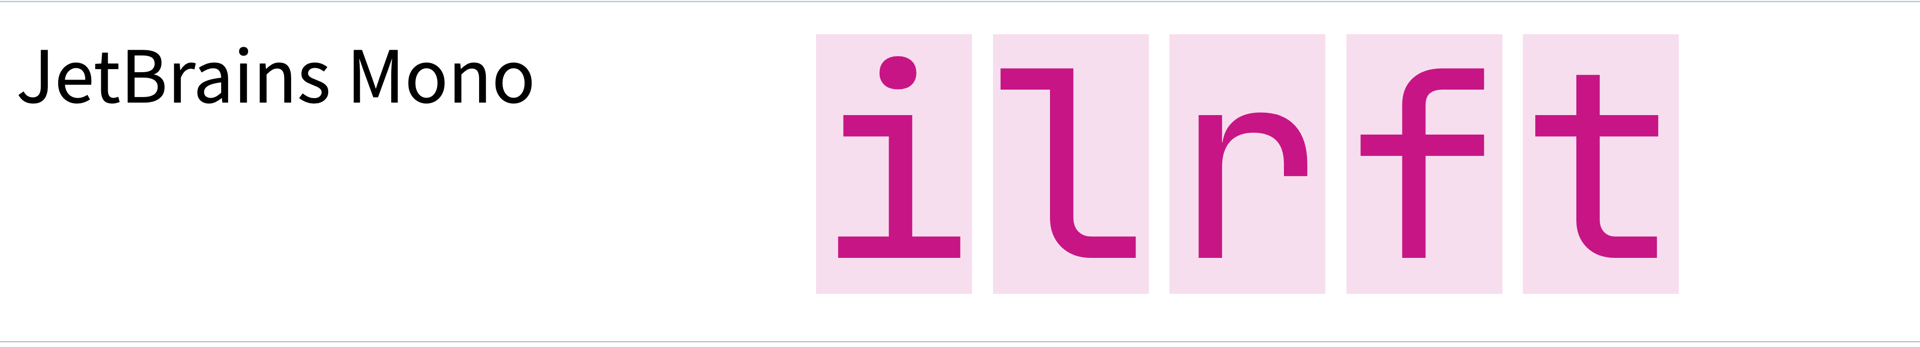 The letter irlft of the JetBrains Mono font